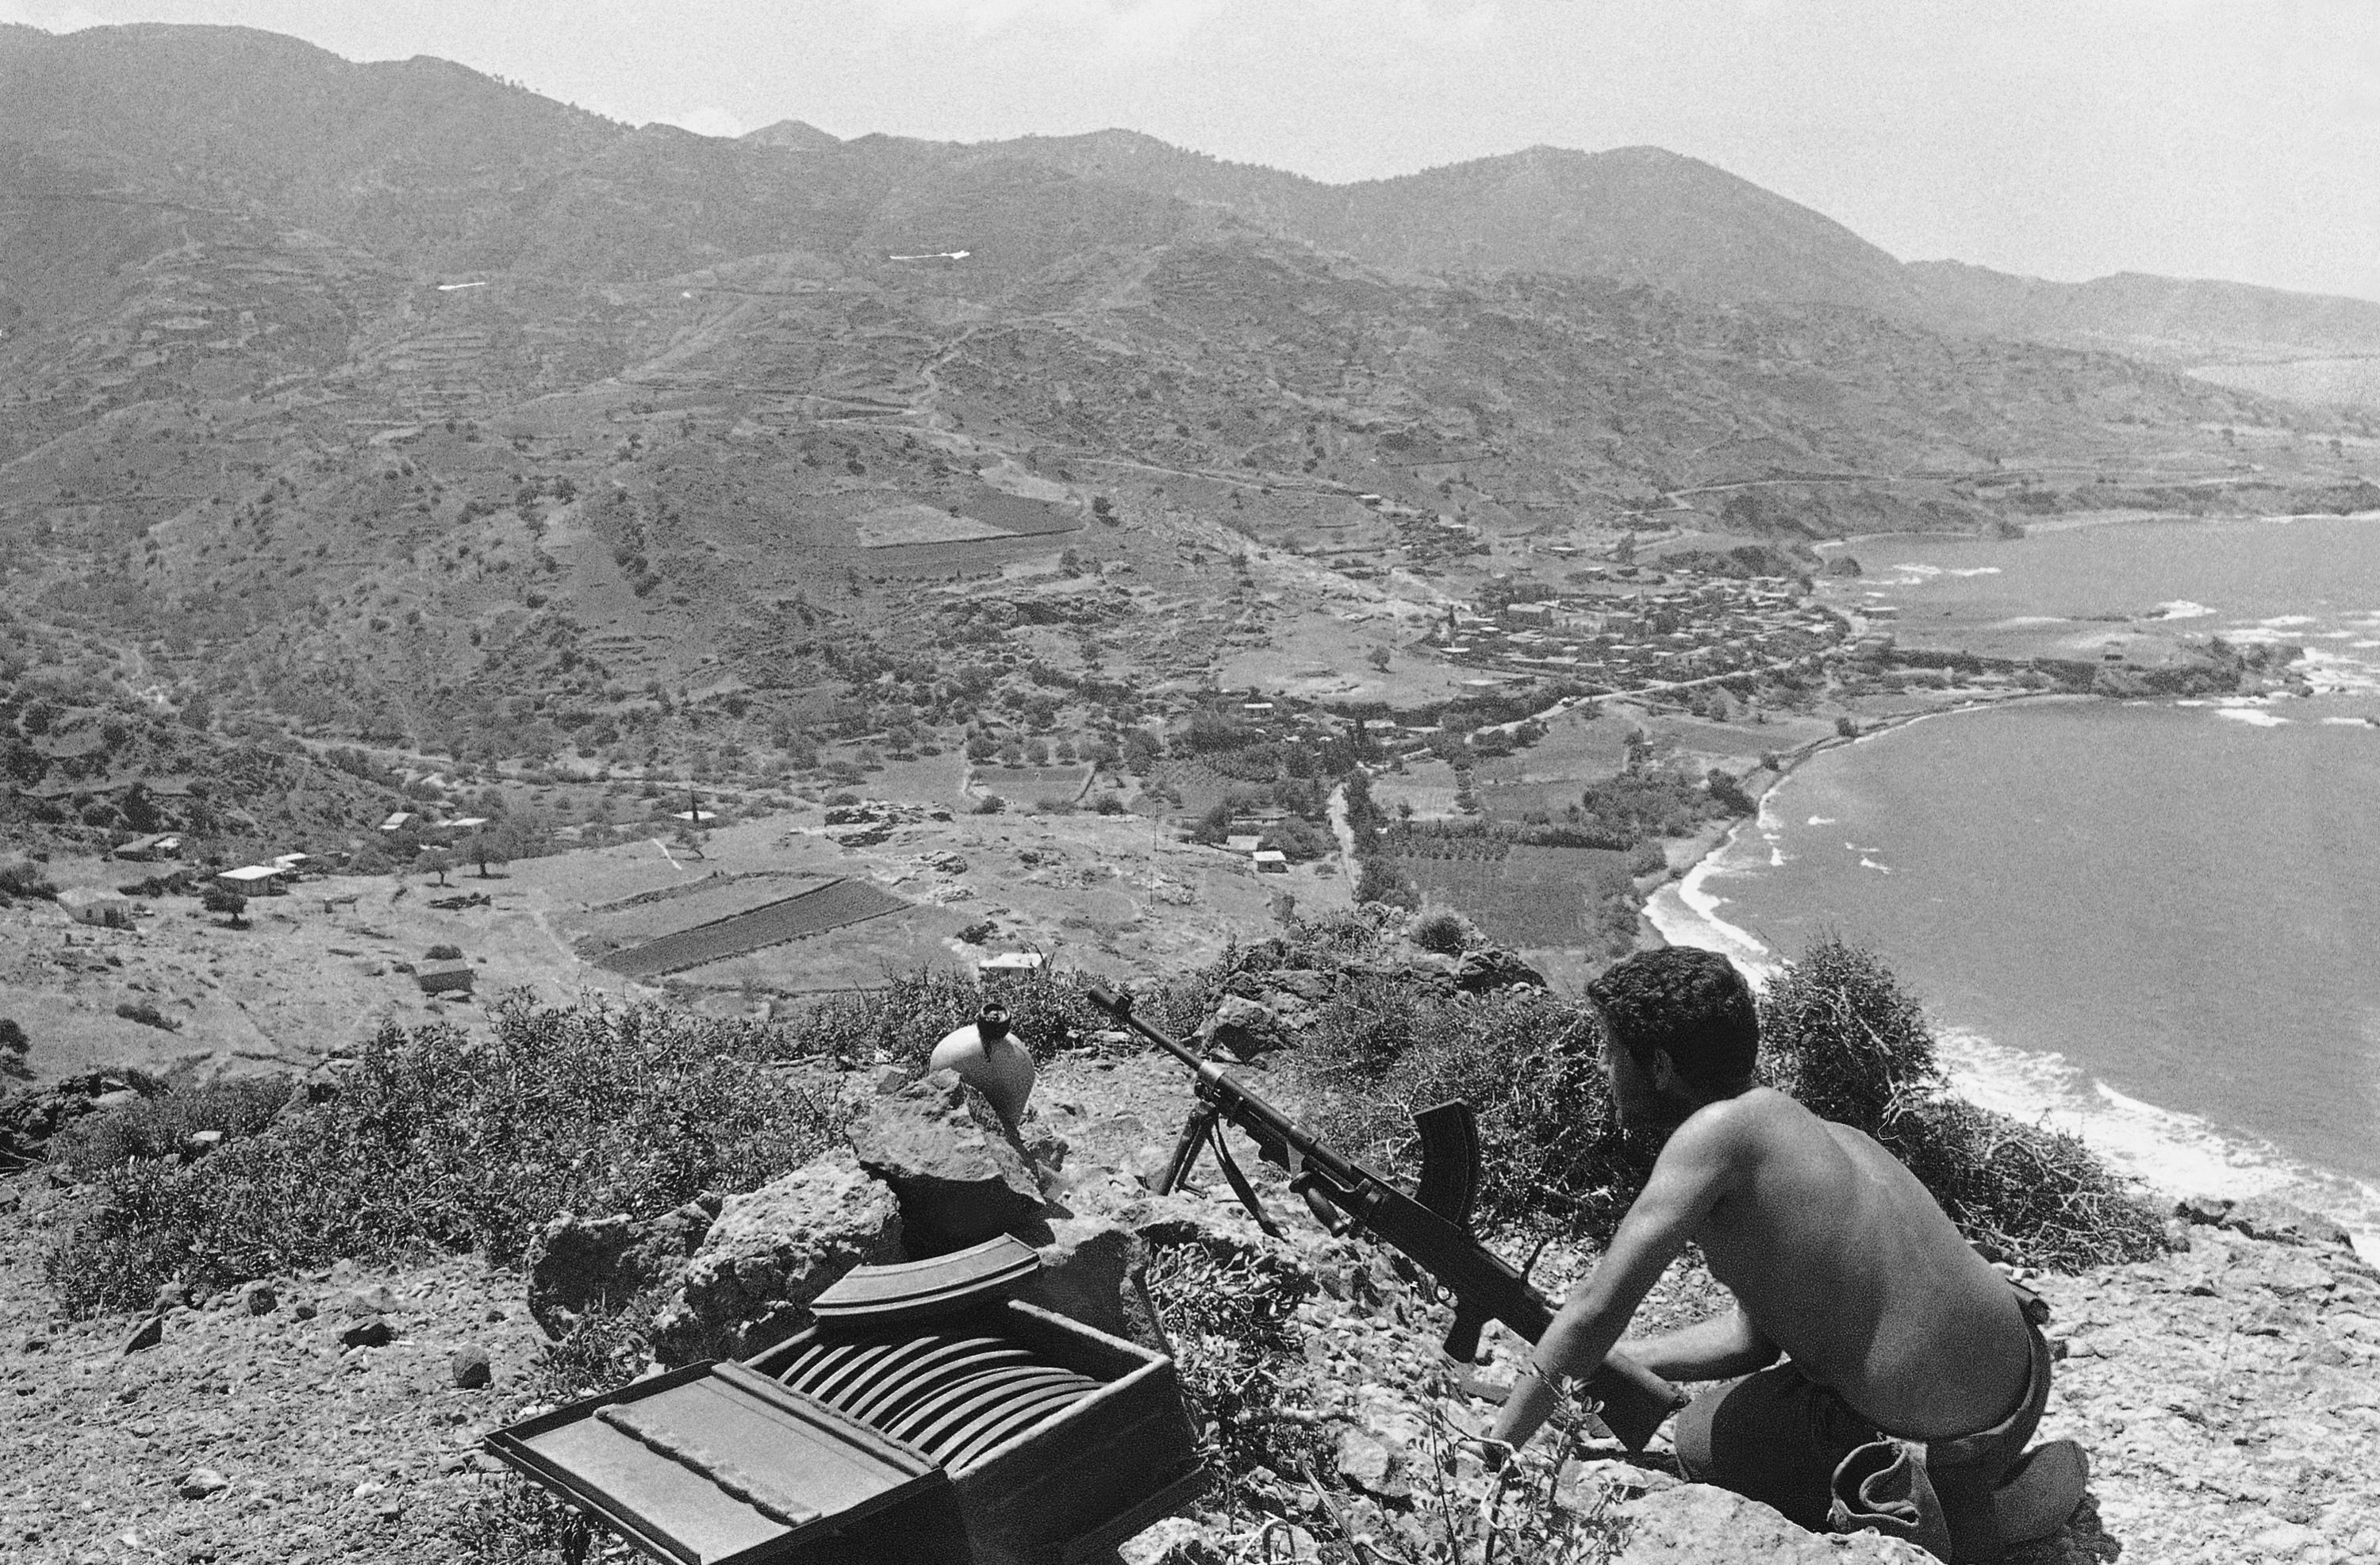 A Turkish Cypriot fighter positions on top the hills outside the village of Kokkina (Erenköy) on Sept. 12, 1964 in Nicosia. The village, housing thousands of refugees starting from 1963, was one of the few areas where arms and supplies could be brought in from Turkey and remained under Greek Cypriot siege for over a decade. (AP Photo)